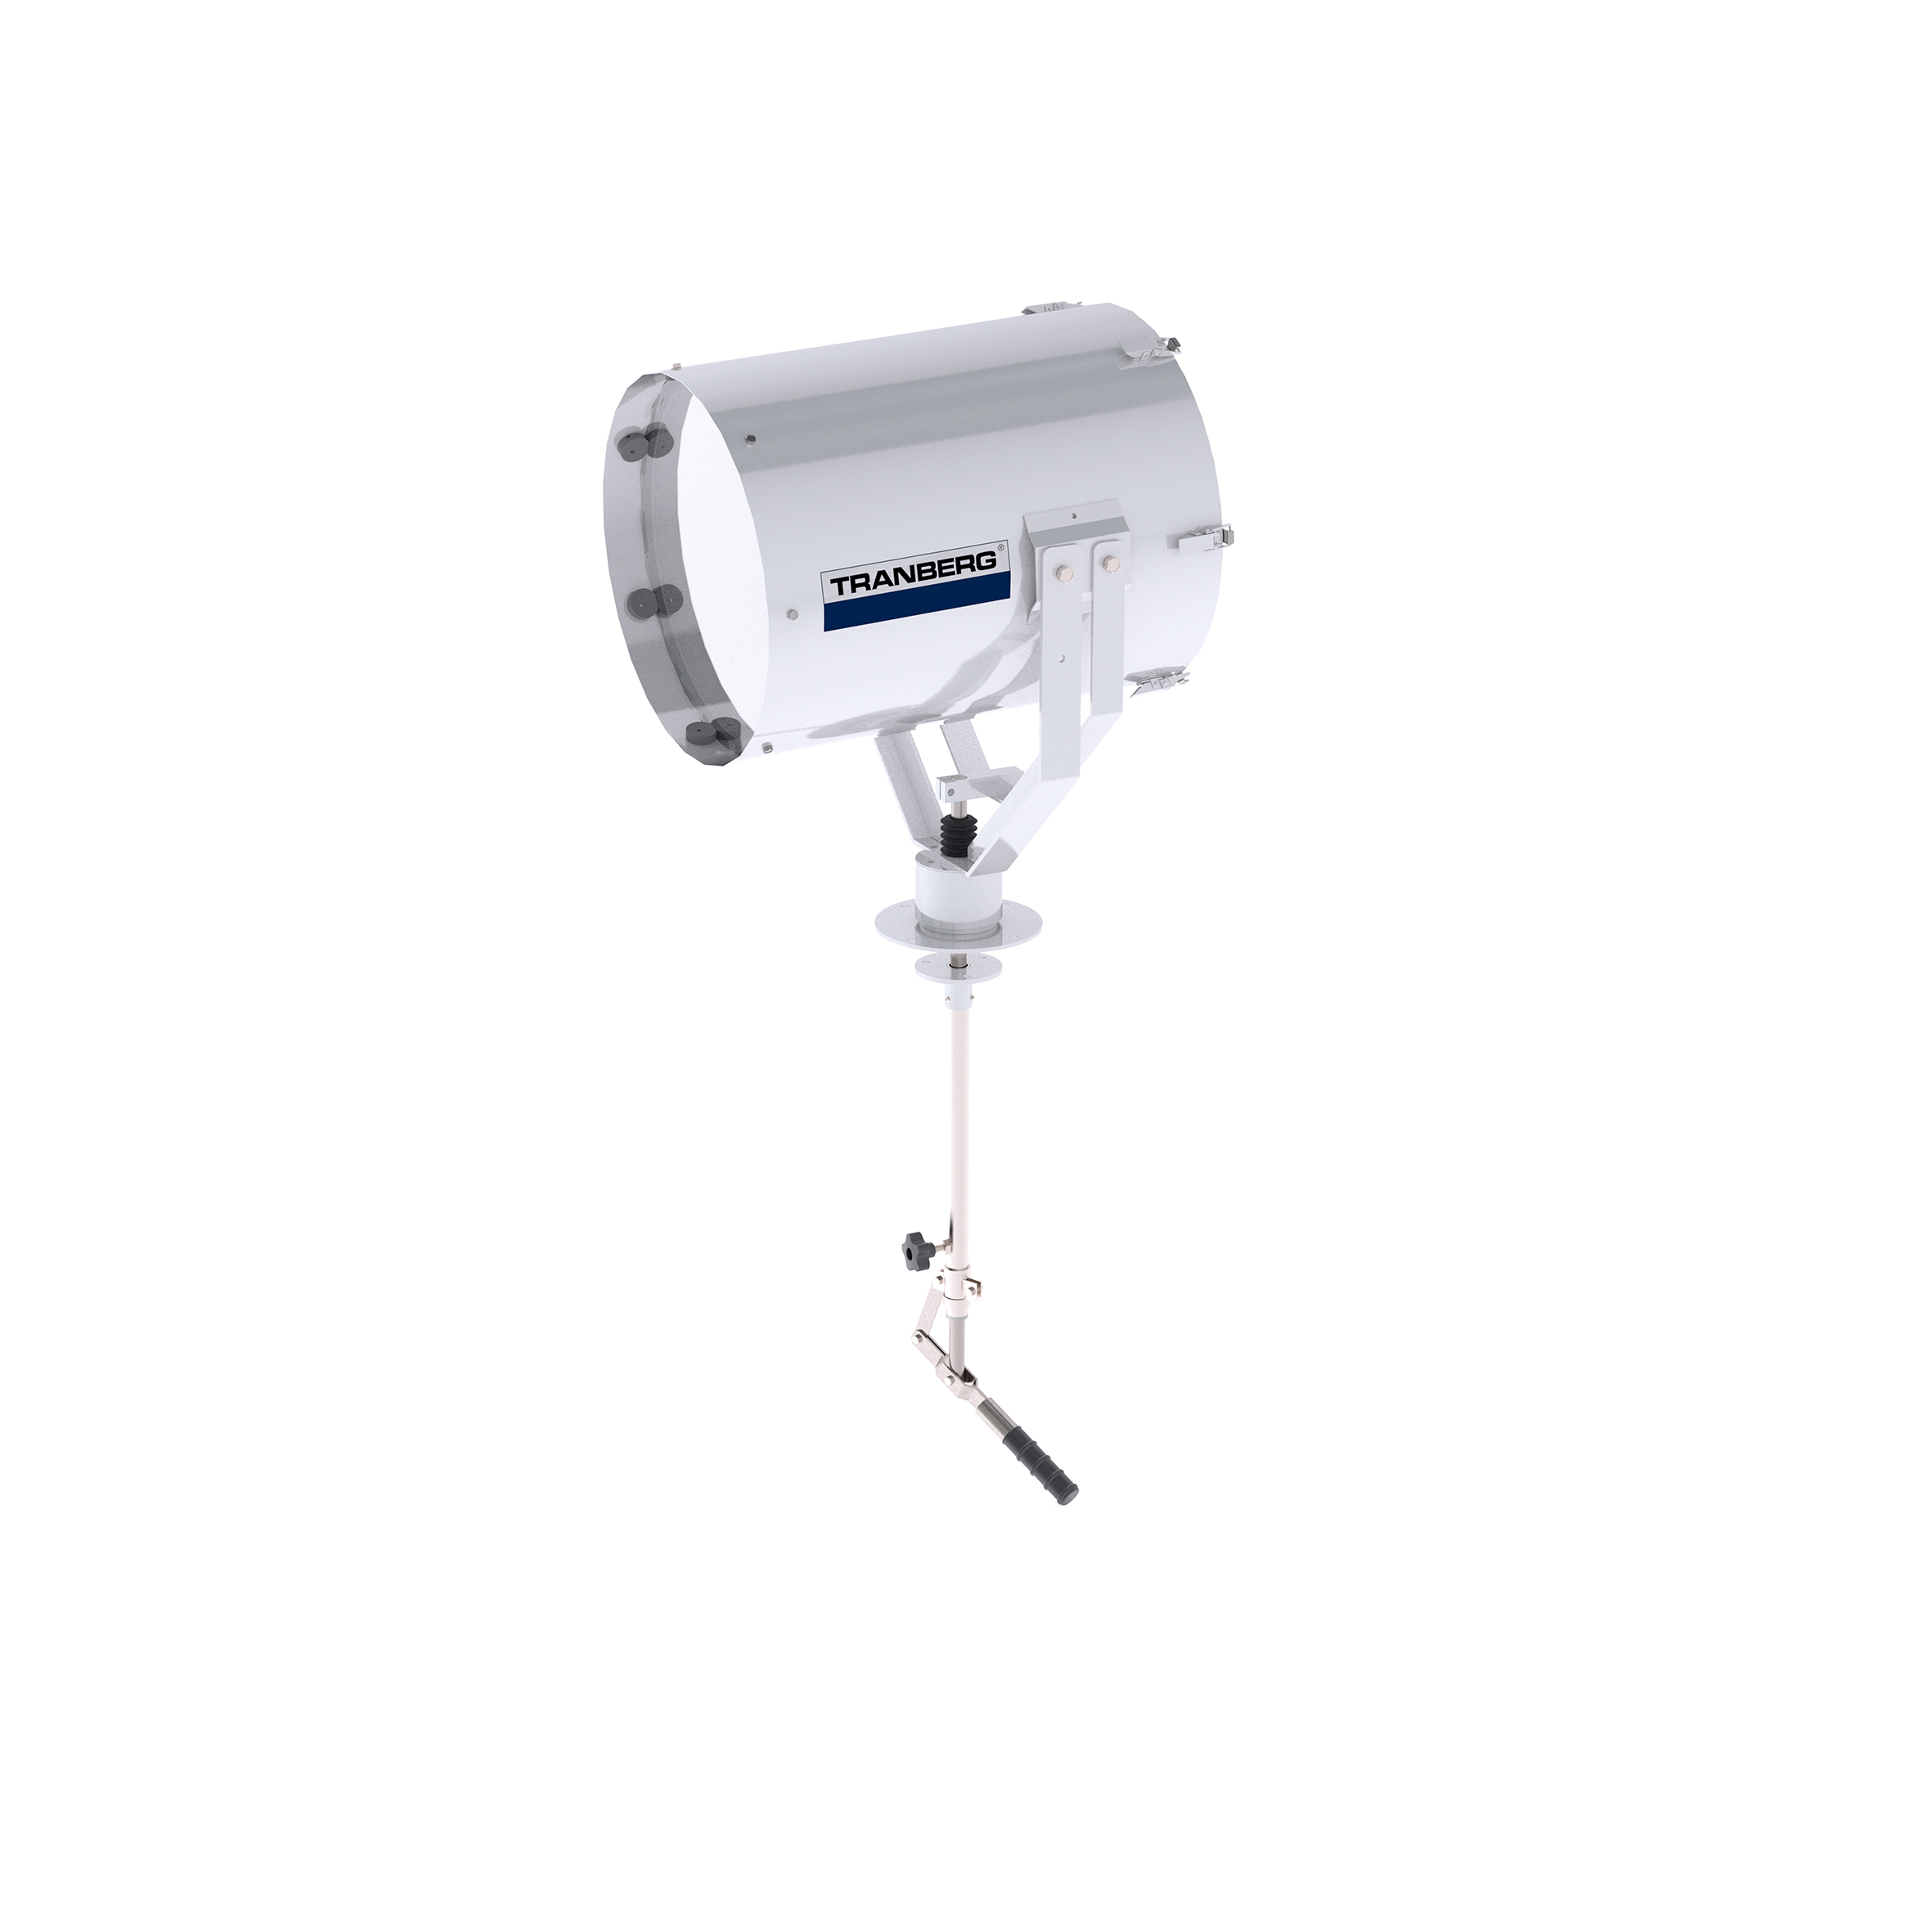 TEF 2630 Searchlight: Xenon 1600W bulb incl, 230V, Bridge Controlled, Stainless Steel